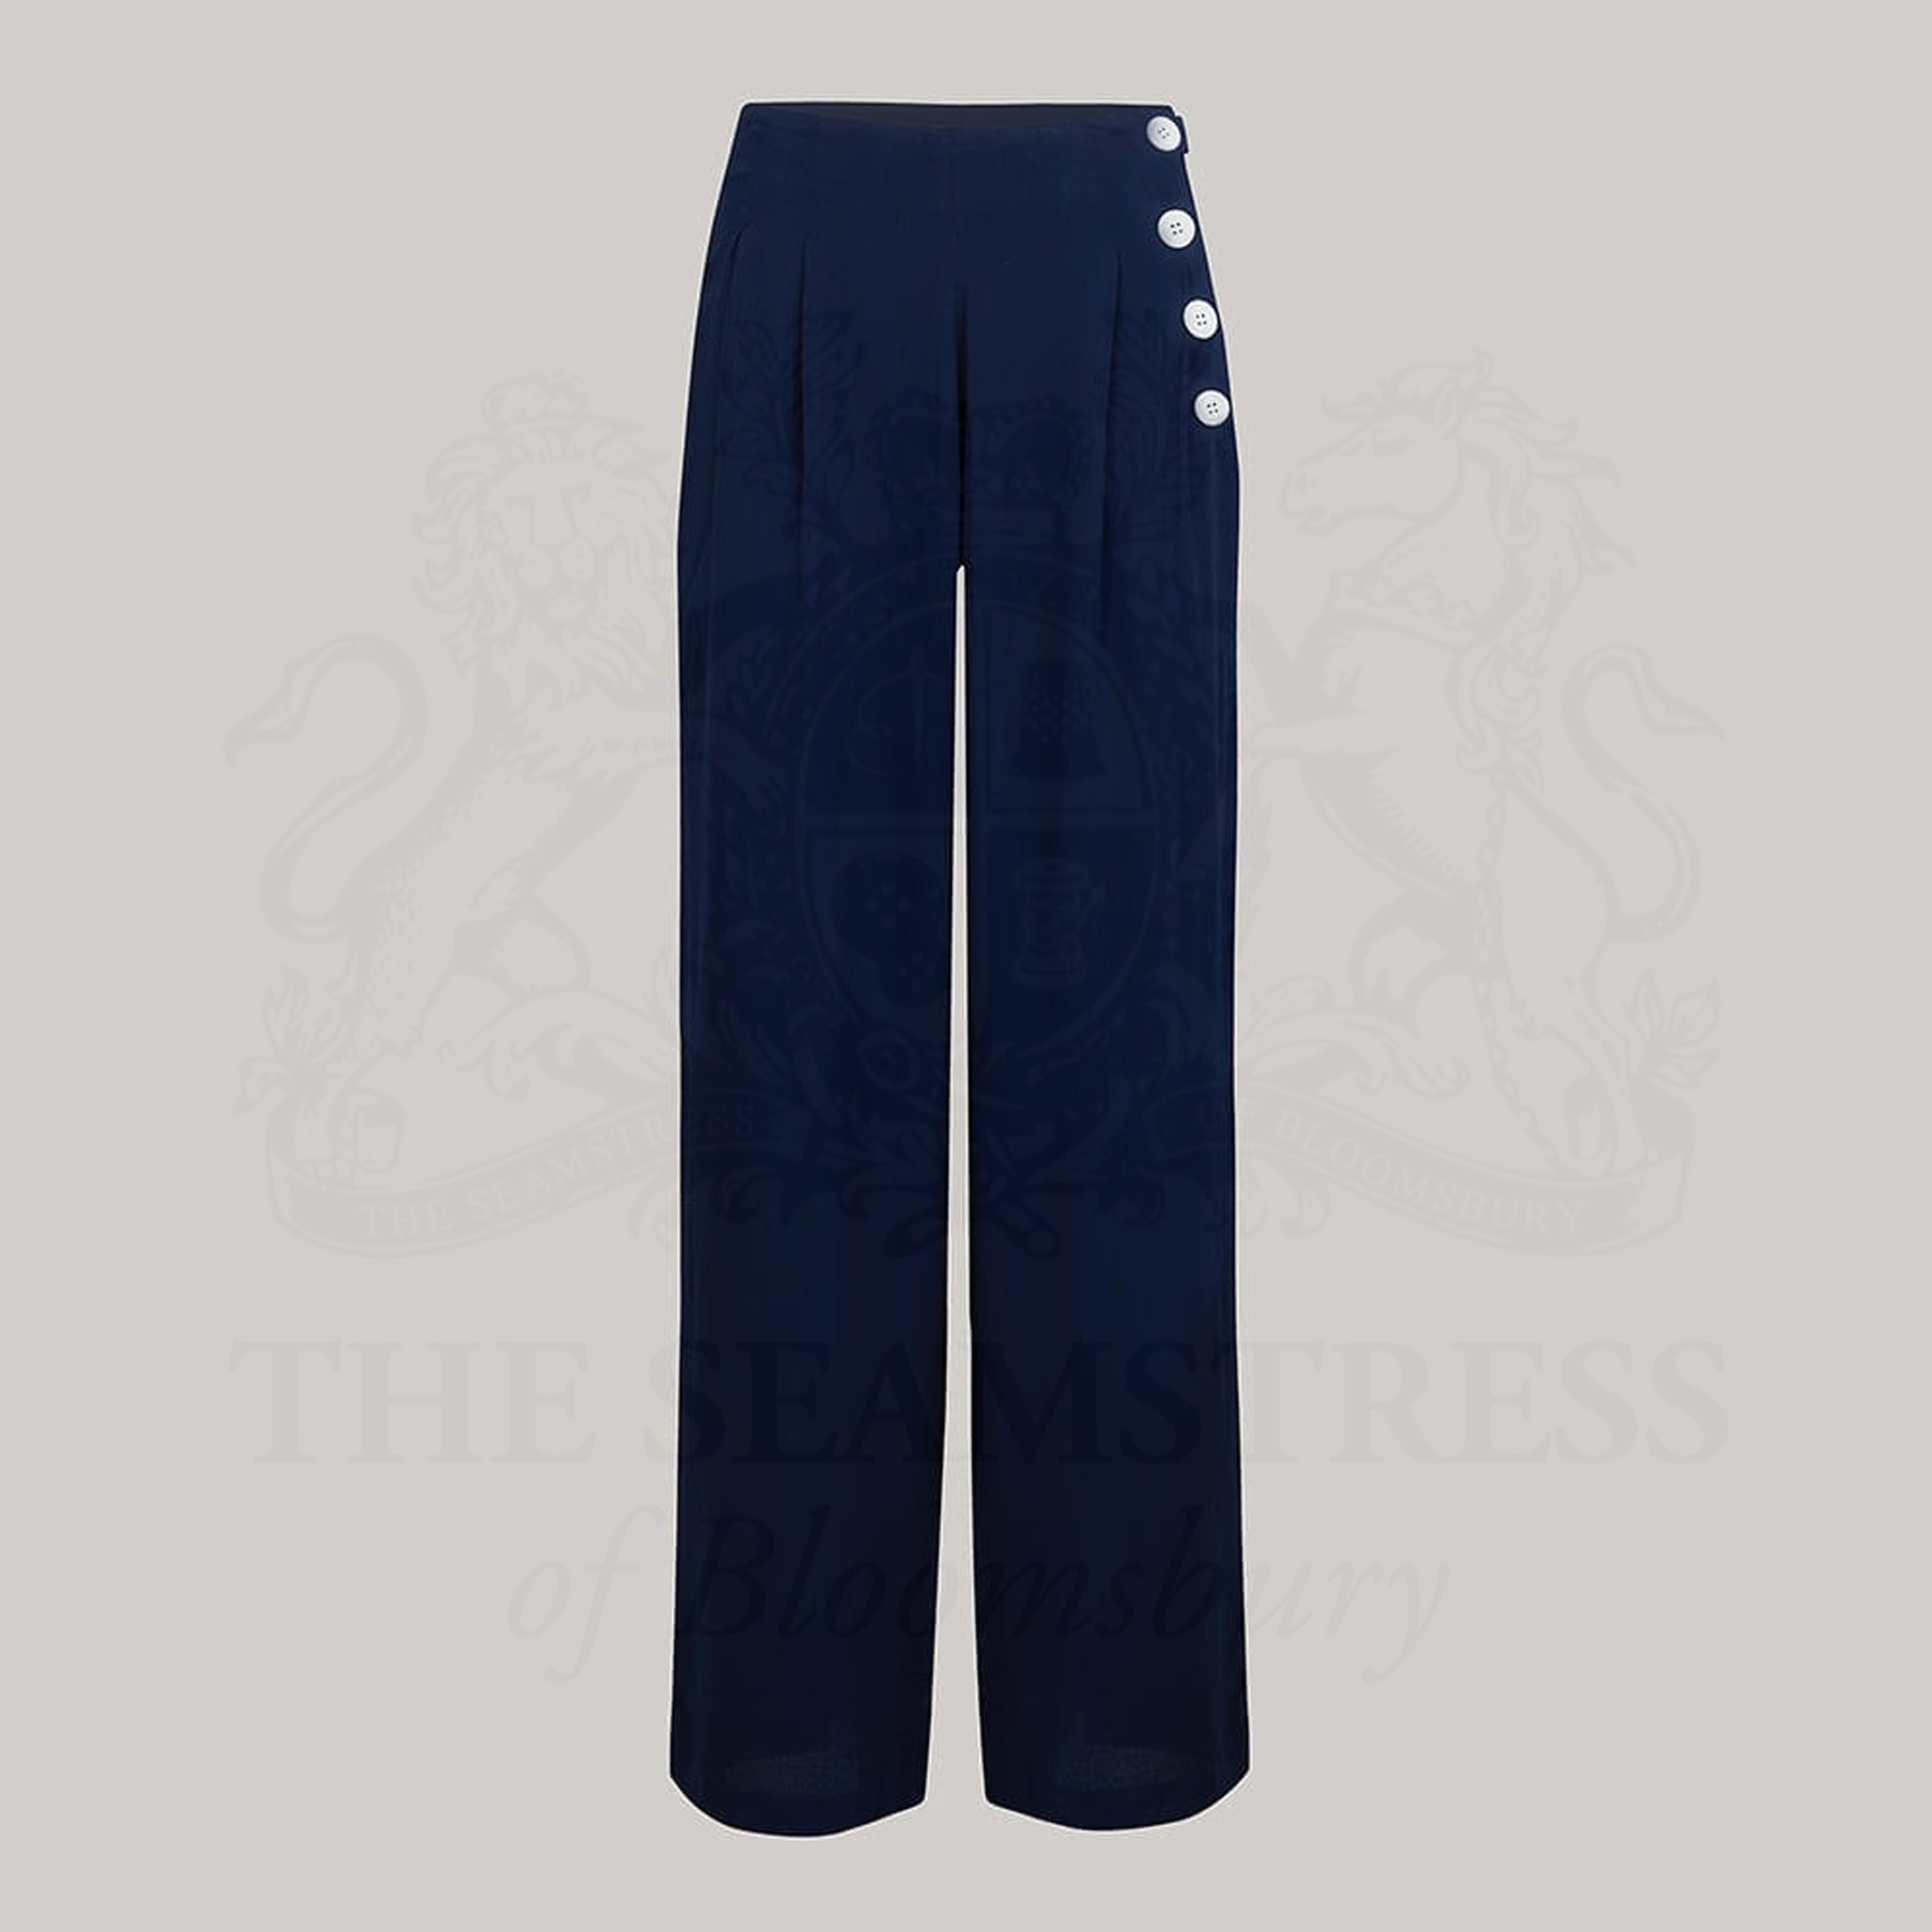 Audrey Trousers French Navy  Vintage Style Women's Trousers - The